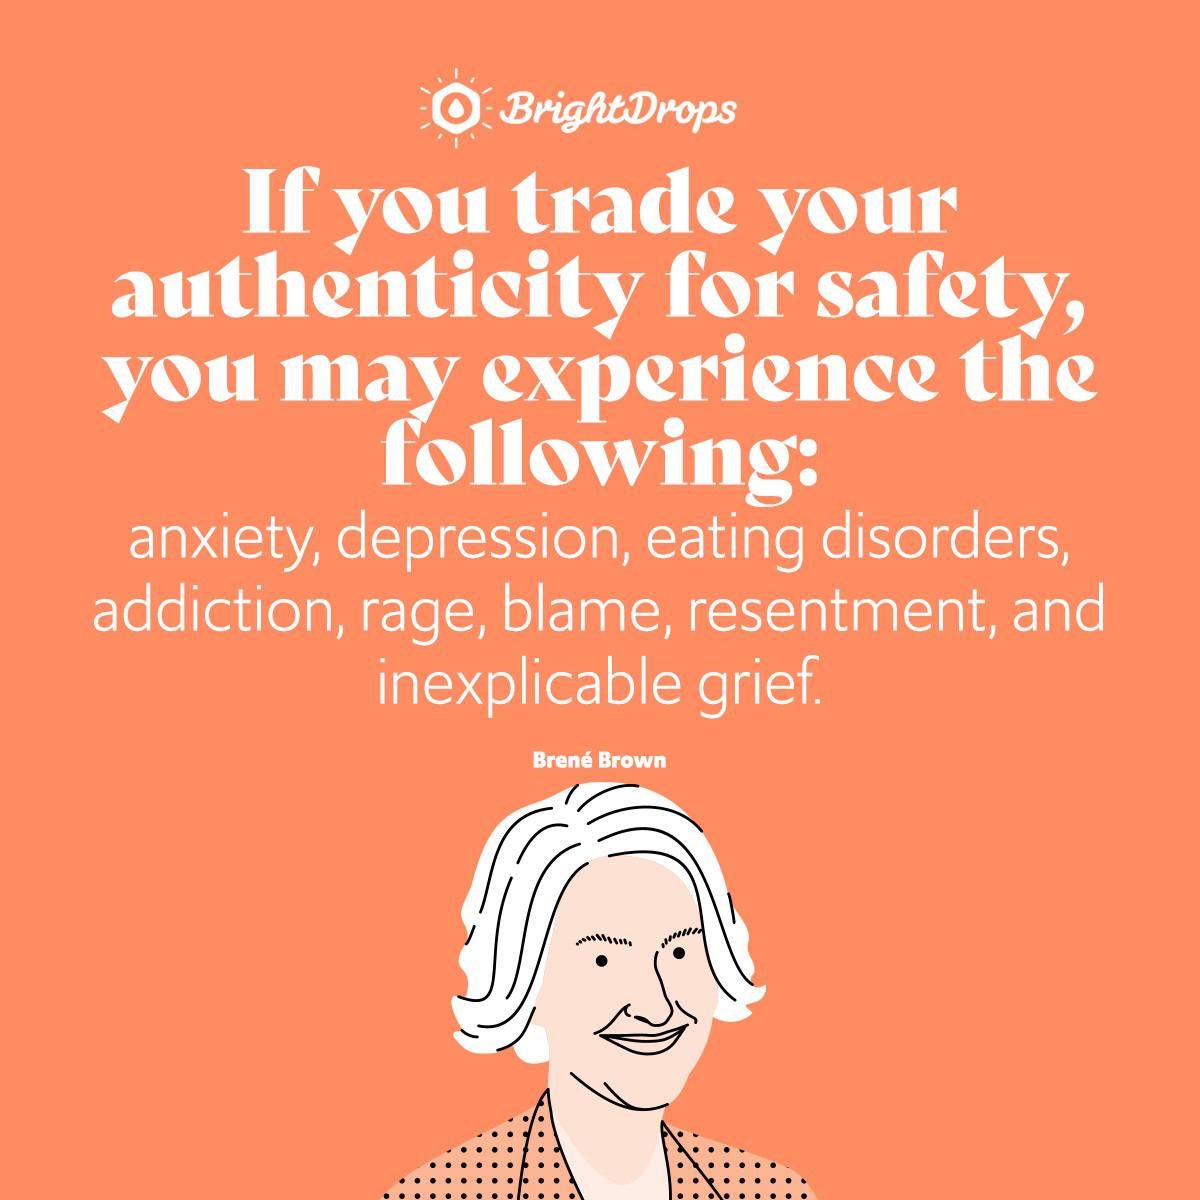 If you trade your authenticity for safety, you may experience the following: anxiety, depression, eating disorders, addiction, rage, blame, resentment, and inexplicable grief. - Brene Brown